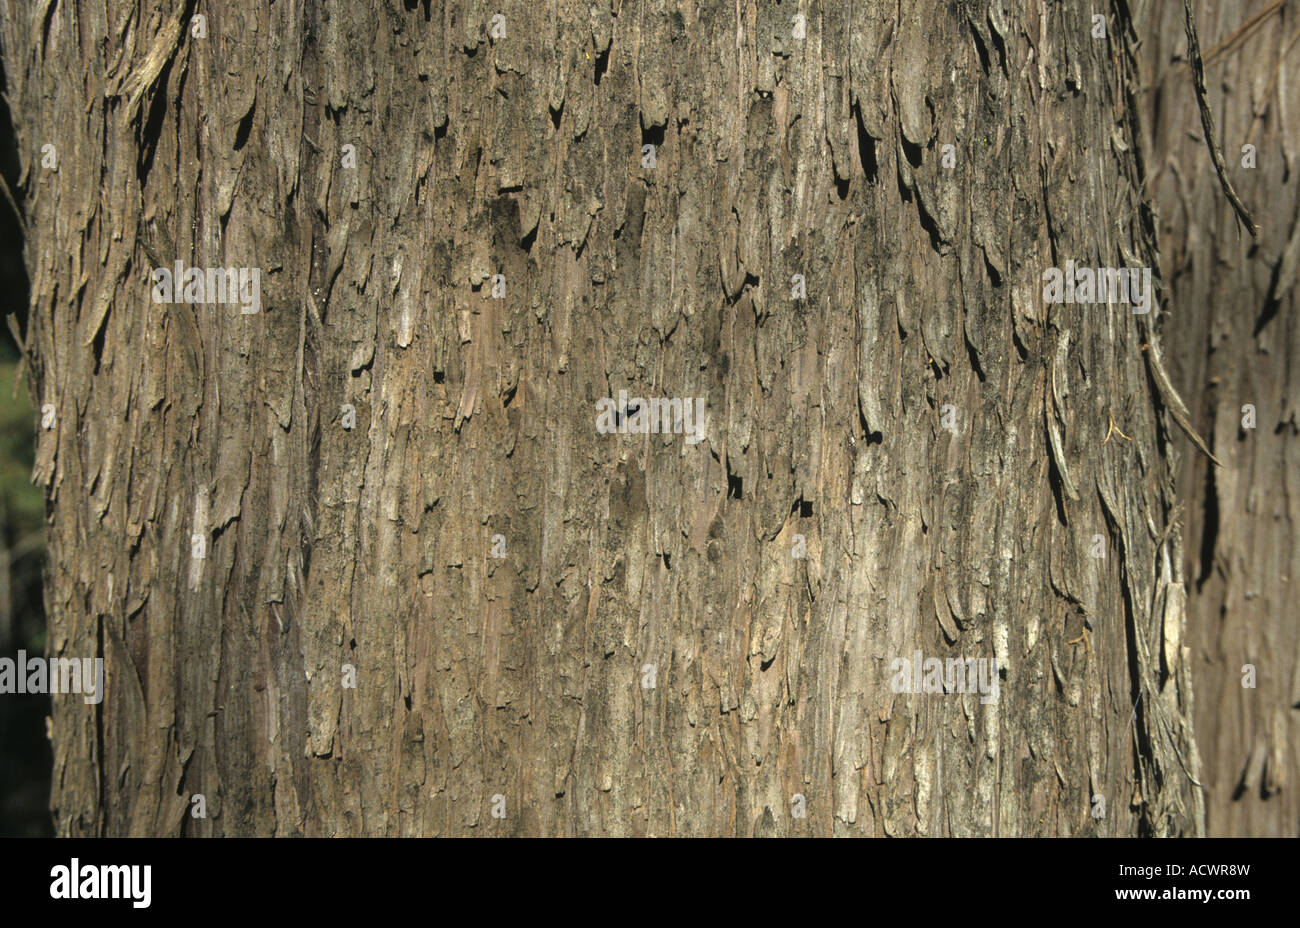 Chinese Cypress Cupressus duclouxiana close up of bark Stock Photo